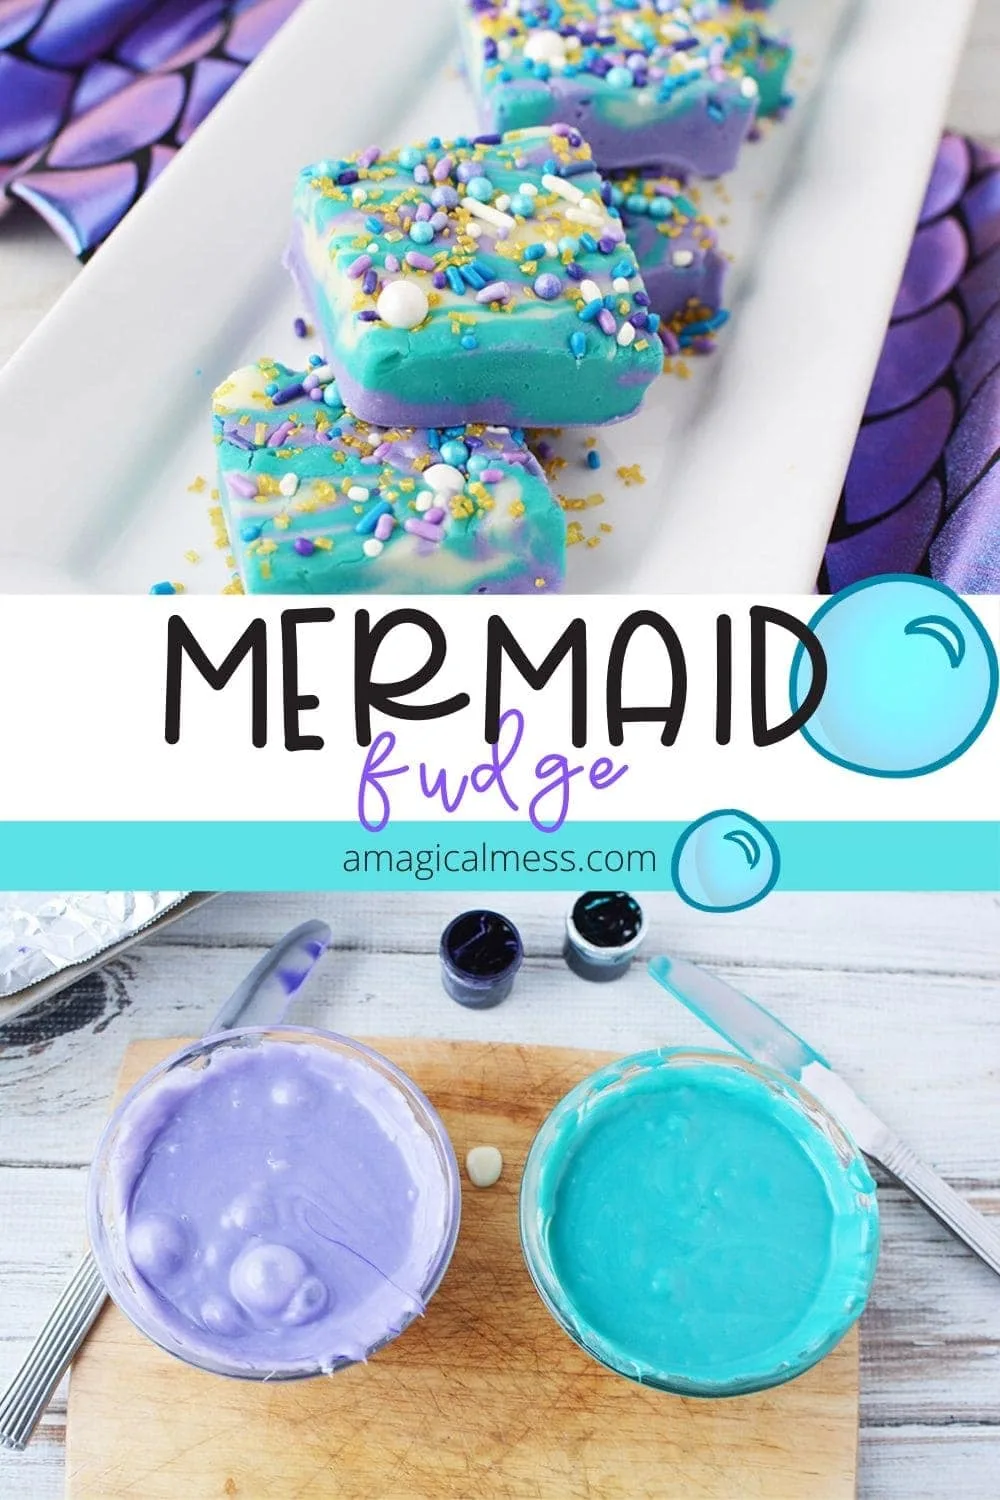 Mermaid candy in bowls and sliced fudge on plate